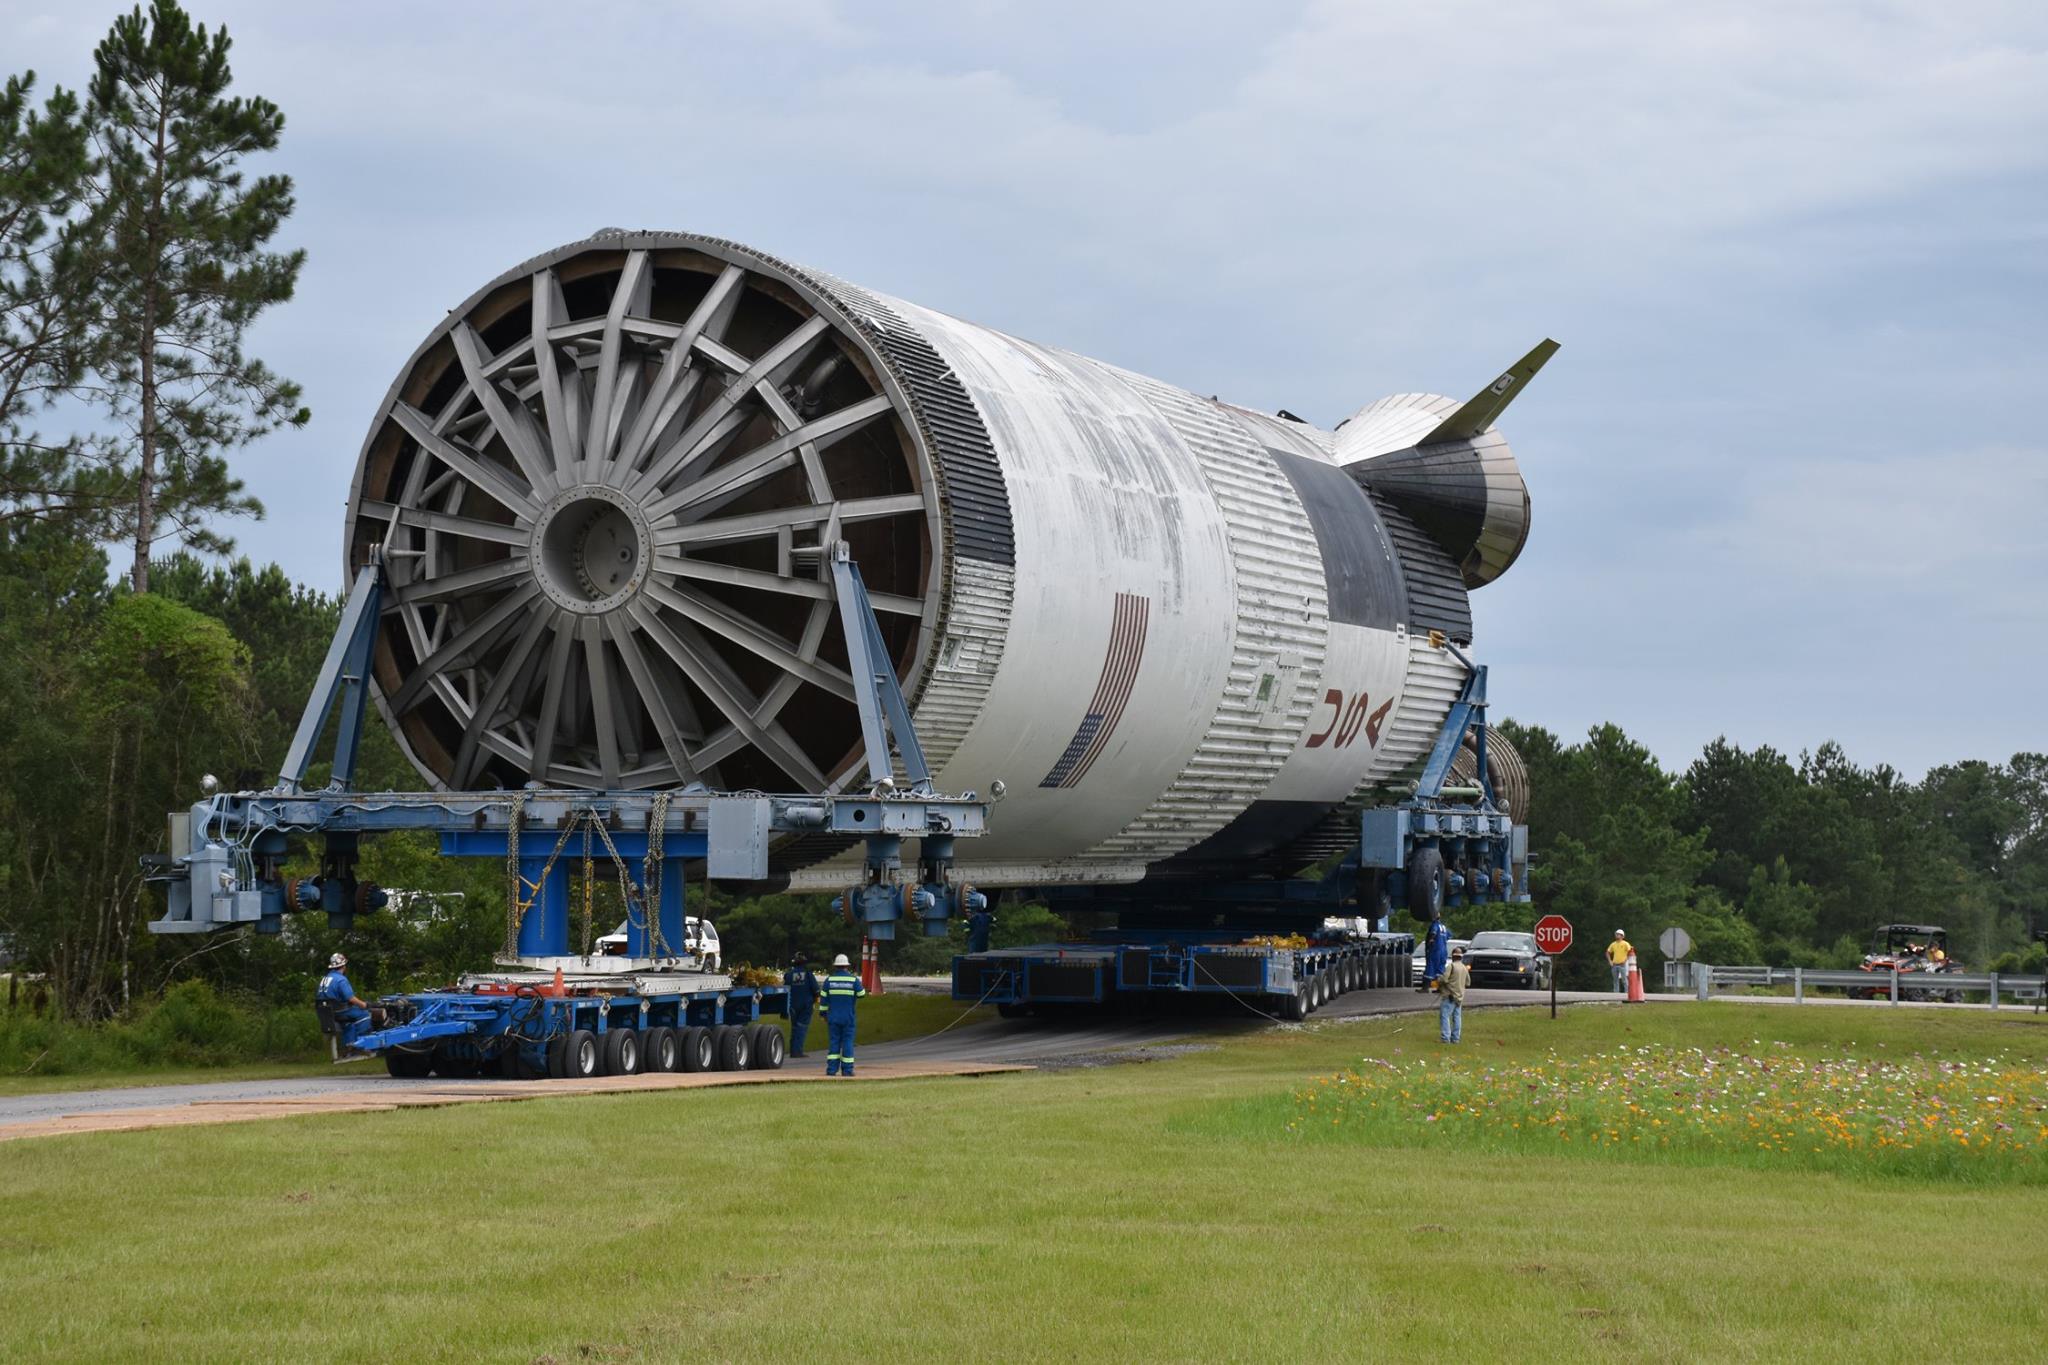 NASA’s Last Apollo Saturn V Rocket Is On Its Way To Mississippi Instead Of The Moon